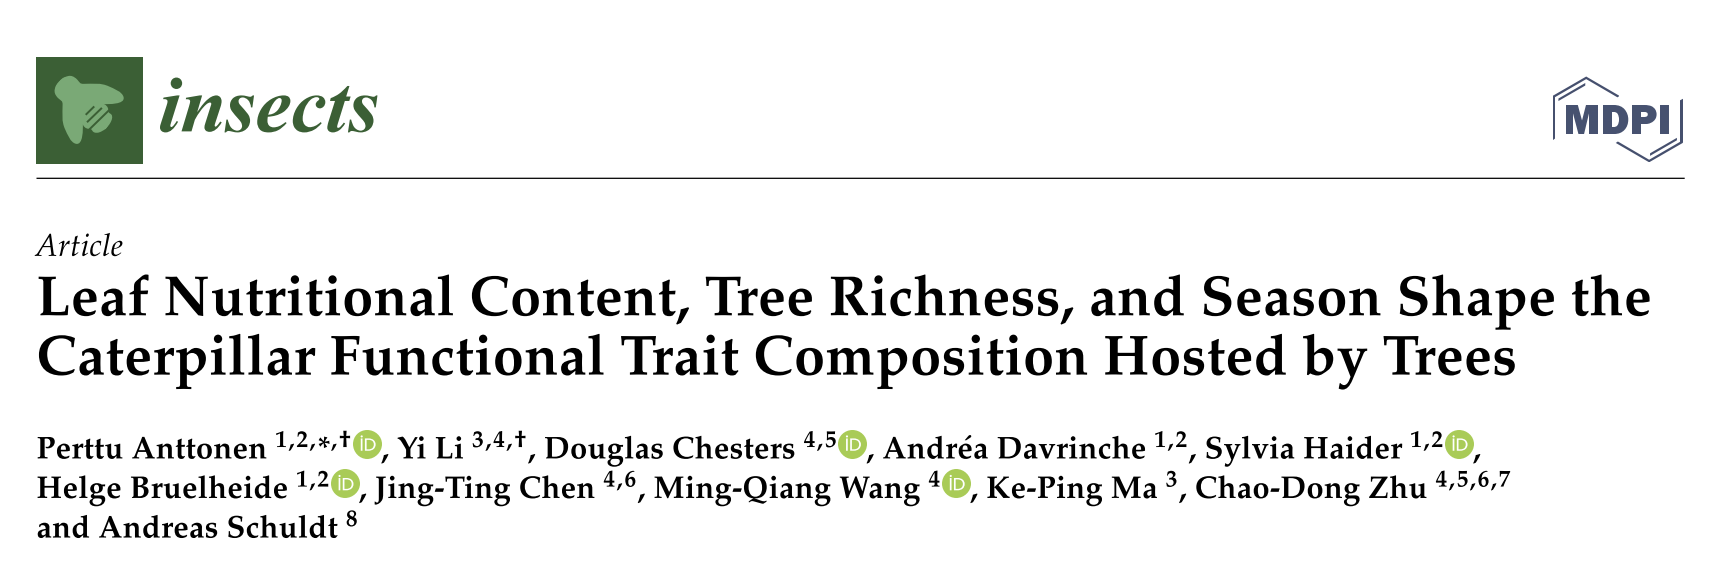 Leaf nutritional content, tree richness, and season shape the caterpillar functional trait composition hosted by trees